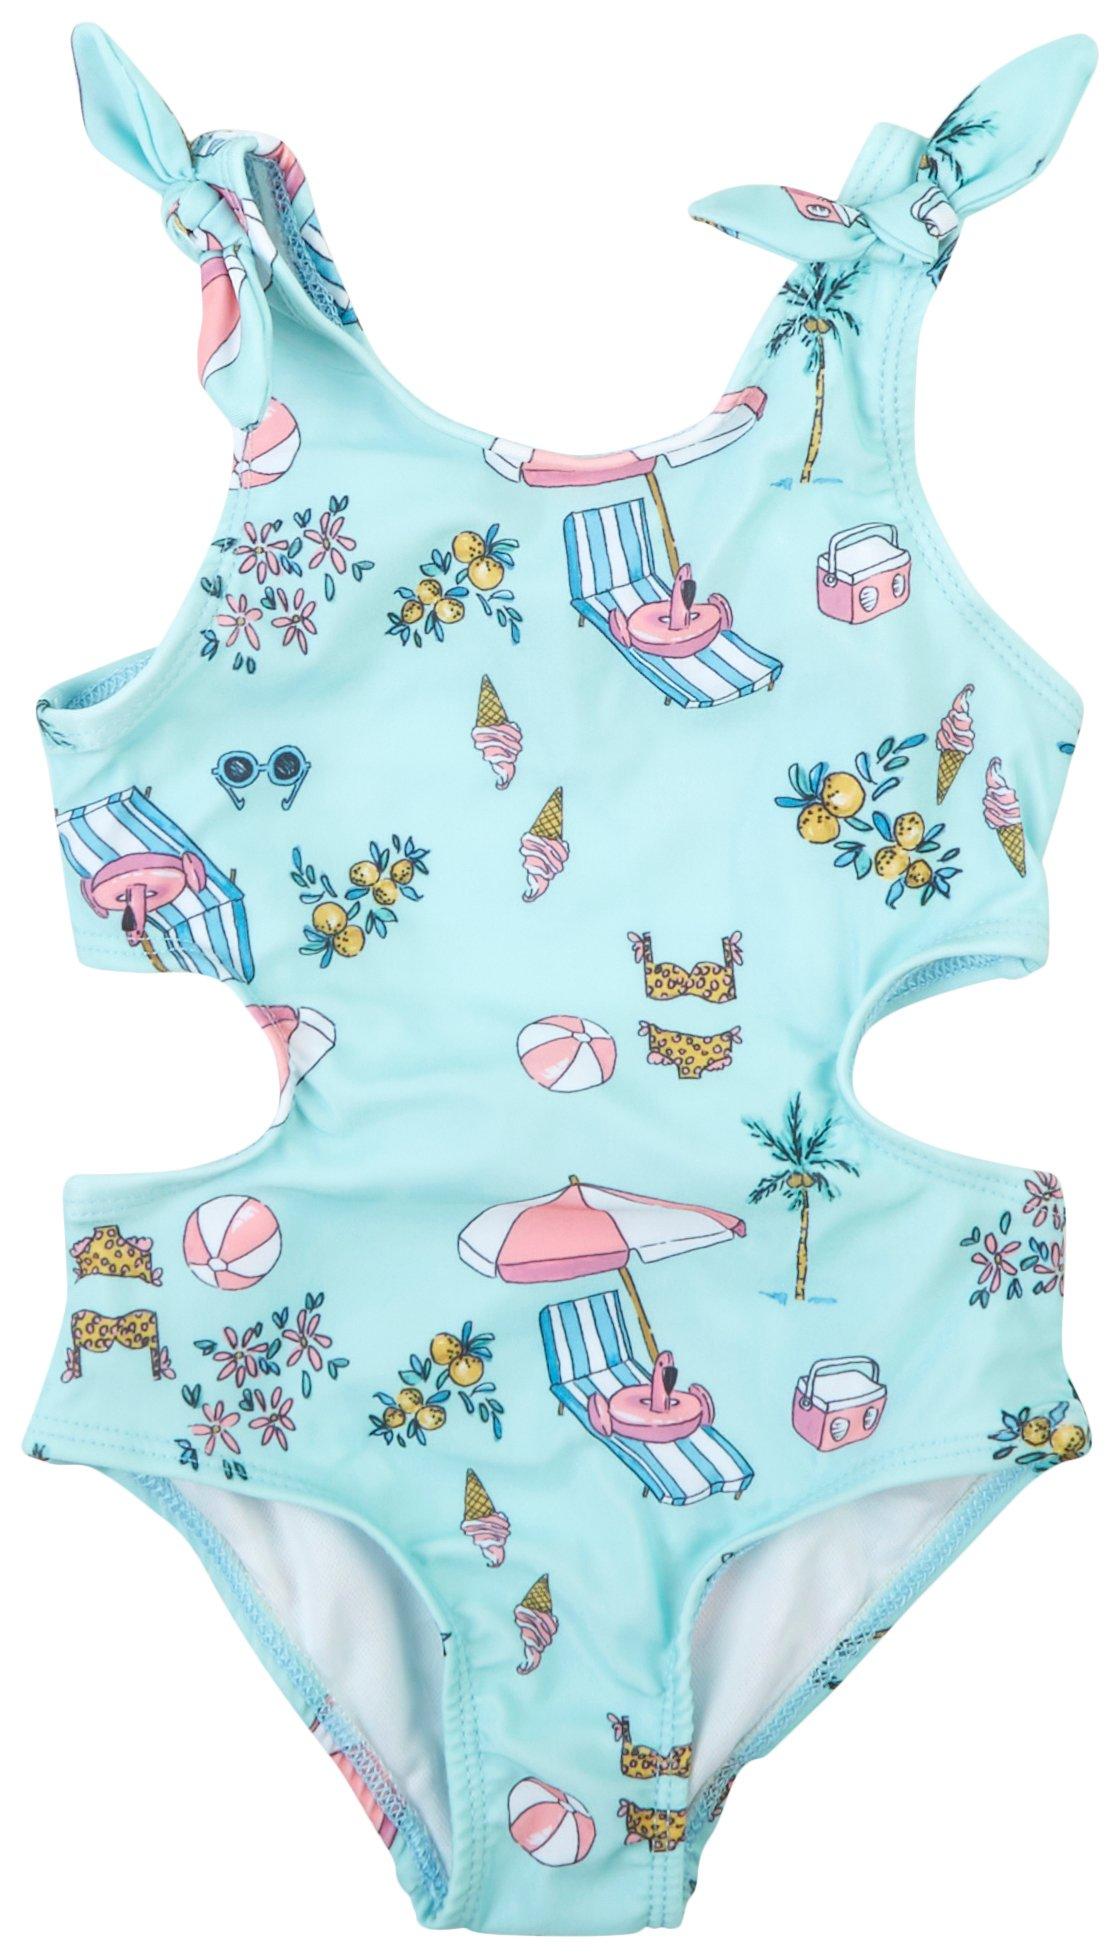 https://images.beallsflorida.com/i/beallsflorida/762-5957-1474-40-yyy/*Toddler-Girls-Cut-Out-One-Piece-Swimsuit*?$BR_thumbnail$&fmt=auto&qlt=default